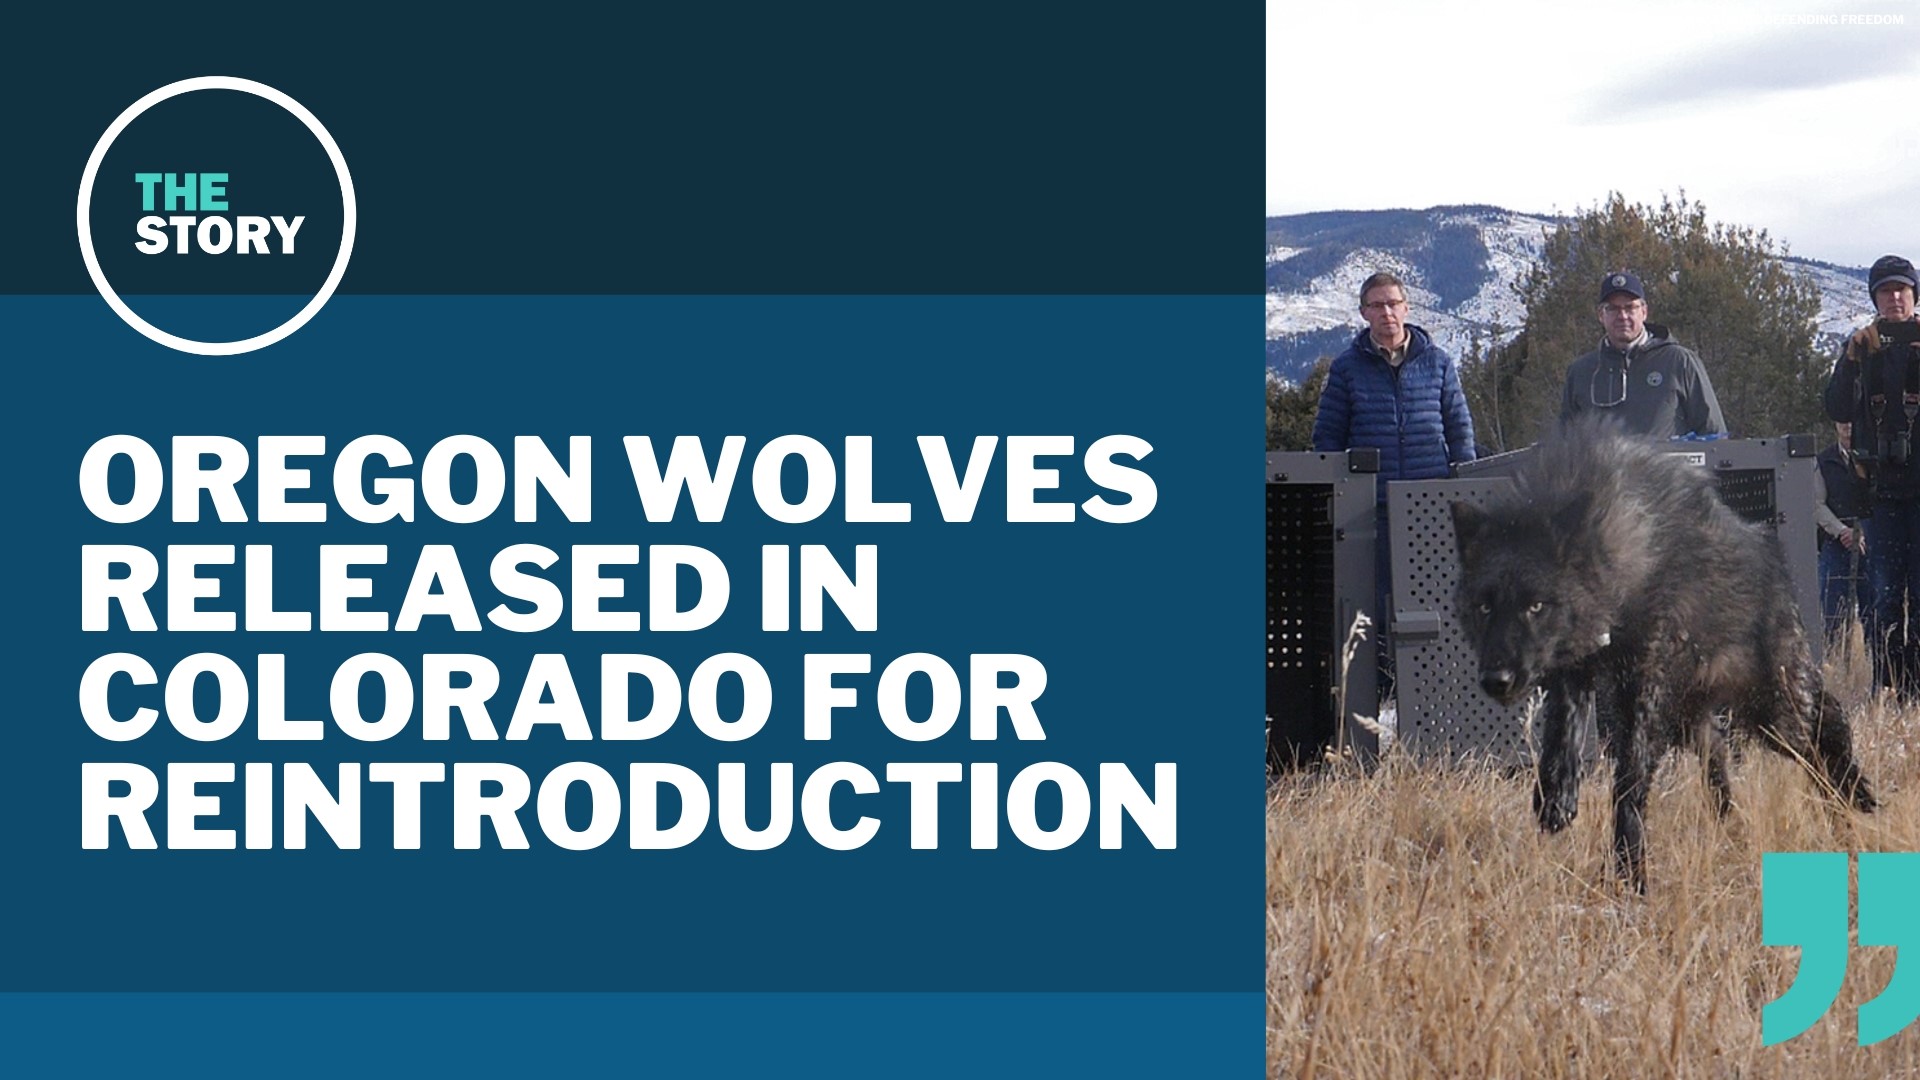 The wolves were captured in Wallowa and Union counties over the weekend. They'll form the foundation of Colorado's own reintroduction efforts.